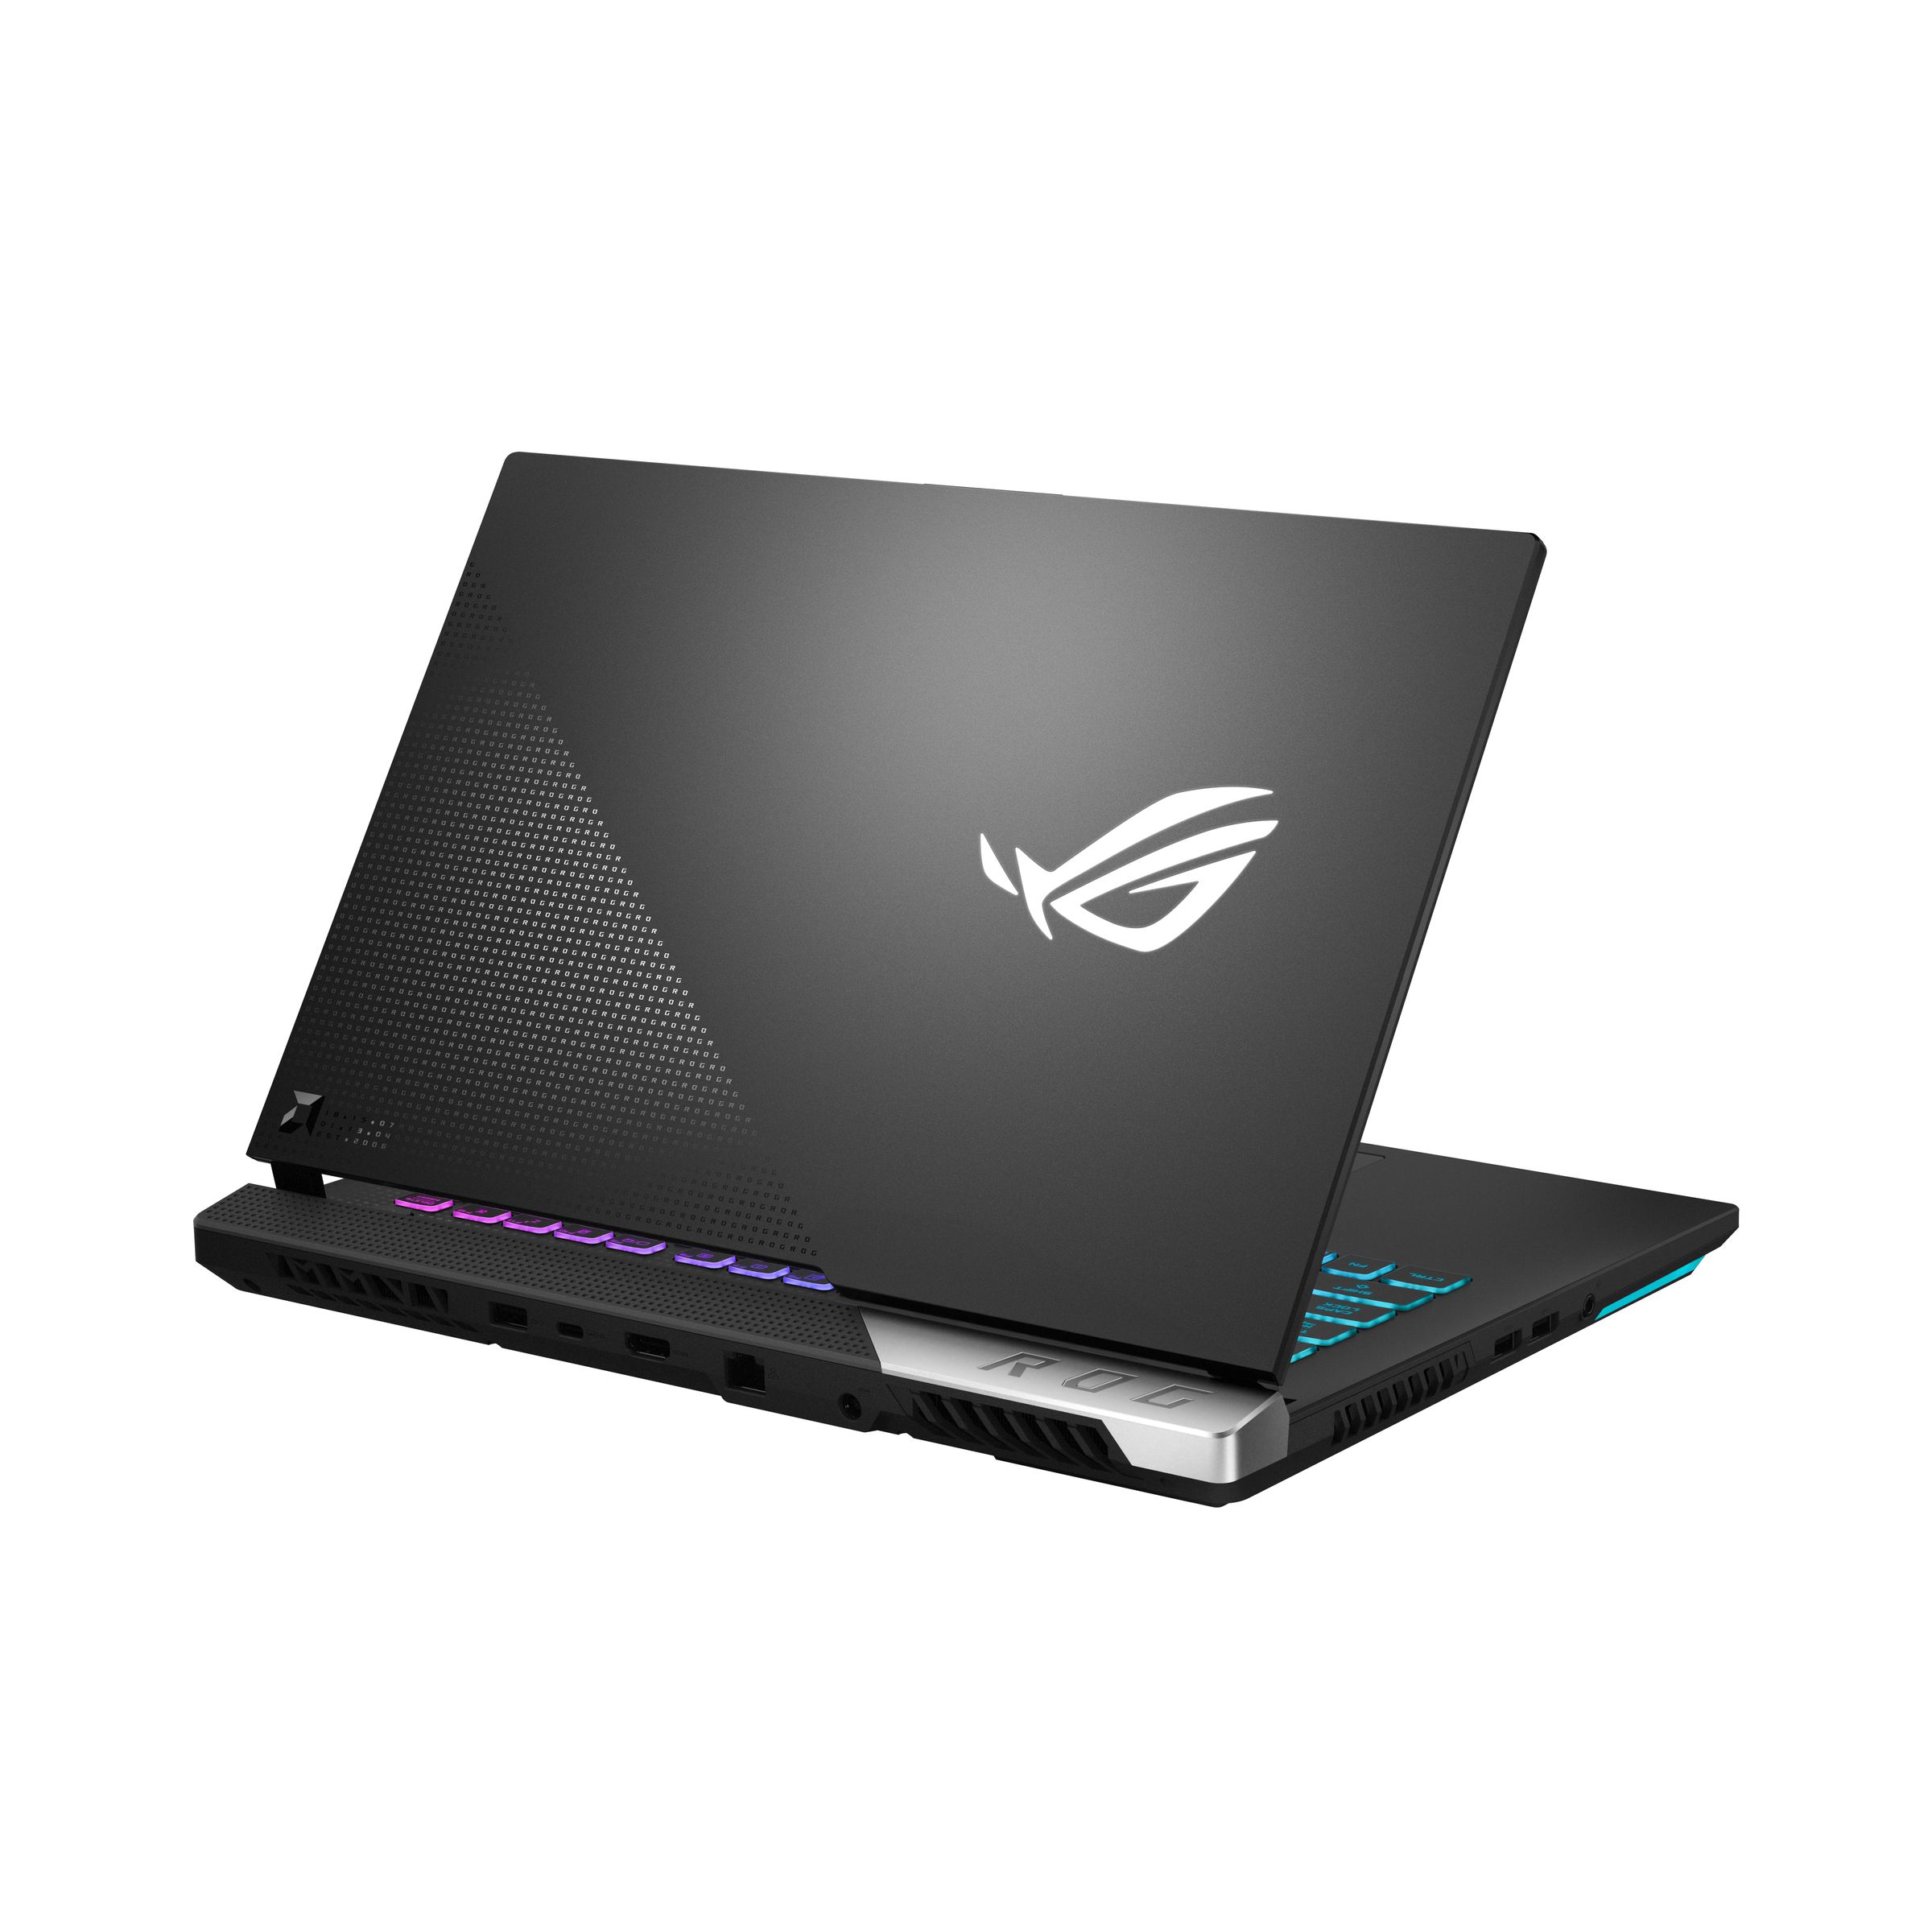 The Asus ROG Strix G15 half open facing away from the camera, angled to the right. 